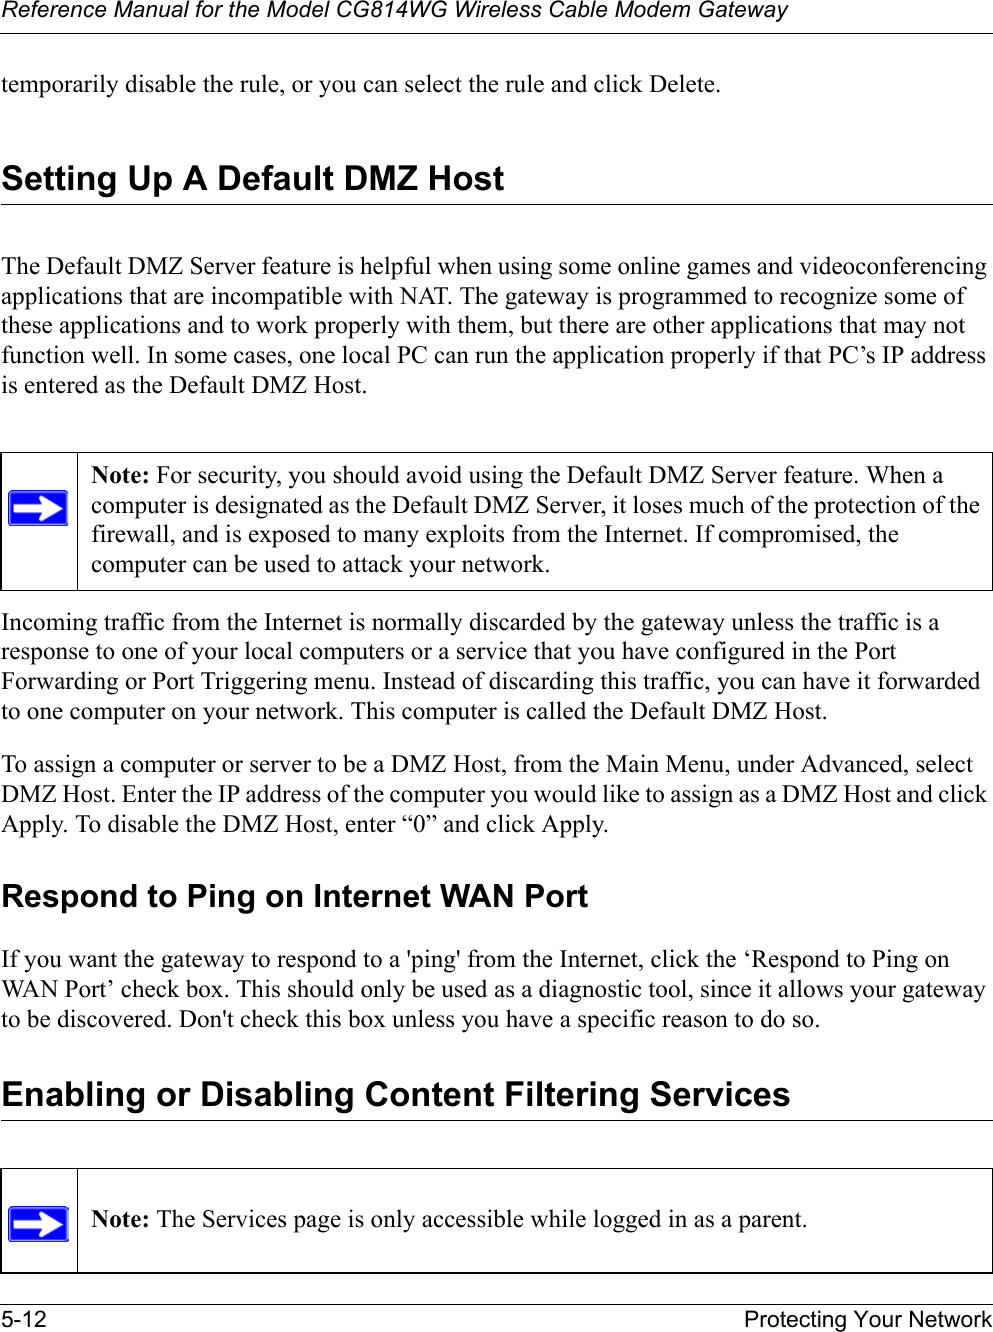 Reference Manual for the Model CG814WG Wireless Cable Modem Gateway5-12 Protecting Your Networktemporarily disable the rule, or you can select the rule and click Delete.Setting Up A Default DMZ HostThe Default DMZ Server feature is helpful when using some online games and videoconferencing applications that are incompatible with NAT. The gateway is programmed to recognize some of these applications and to work properly with them, but there are other applications that may not function well. In some cases, one local PC can run the application properly if that PC’s IP address is entered as the Default DMZ Host.Incoming traffic from the Internet is normally discarded by the gateway unless the traffic is a response to one of your local computers or a service that you have configured in the Port Forwarding or Port Triggering menu. Instead of discarding this traffic, you can have it forwarded to one computer on your network. This computer is called the Default DMZ Host.To assign a computer or server to be a DMZ Host, from the Main Menu, under Advanced, select DMZ Host. Enter the IP address of the computer you would like to assign as a DMZ Host and click Apply. To disable the DMZ Host, enter “0” and click Apply.Respond to Ping on Internet WAN PortIf you want the gateway to respond to a &apos;ping&apos; from the Internet, click the ‘Respond to Ping on WAN Port’ check box. This should only be used as a diagnostic tool, since it allows your gateway to be discovered. Don&apos;t check this box unless you have a specific reason to do so.Enabling or Disabling Content Filtering ServicesNote: For security, you should avoid using the Default DMZ Server feature. When a computer is designated as the Default DMZ Server, it loses much of the protection of the firewall, and is exposed to many exploits from the Internet. If compromised, the computer can be used to attack your network.Note: The Services page is only accessible while logged in as a parent.